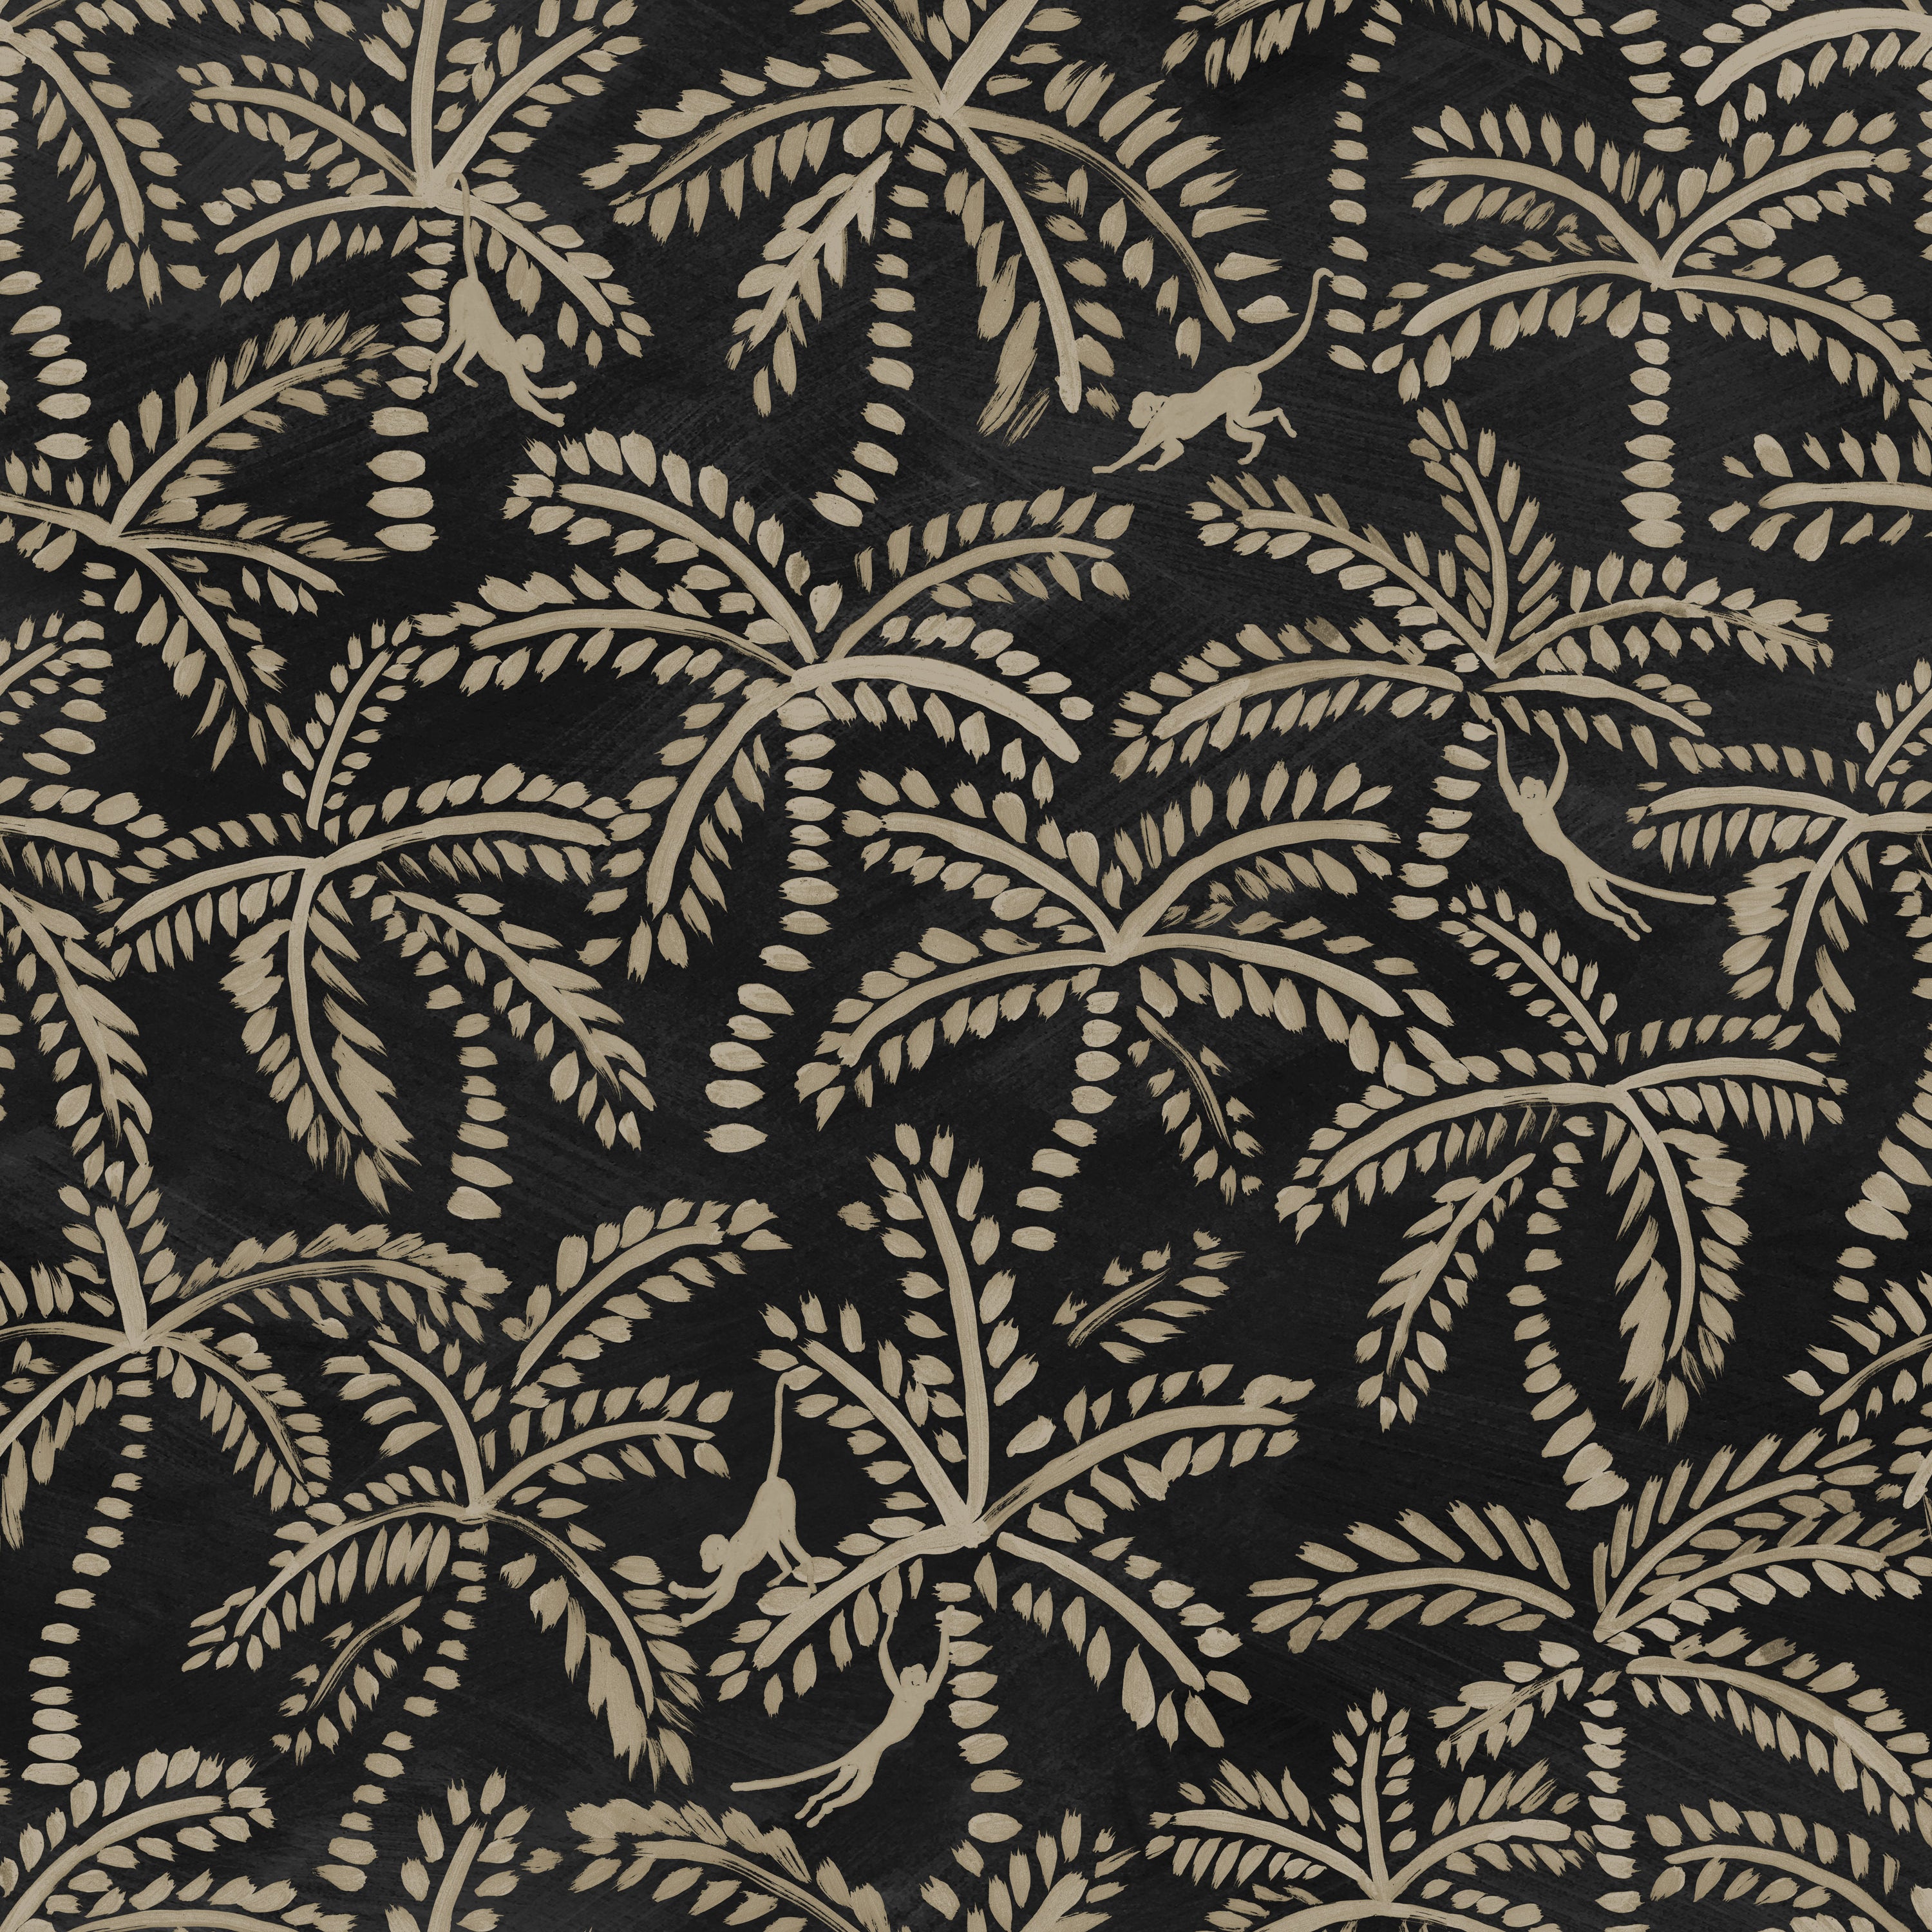 Detail of wallpaper in a playful palm tree and monkey print in tan on a black field.